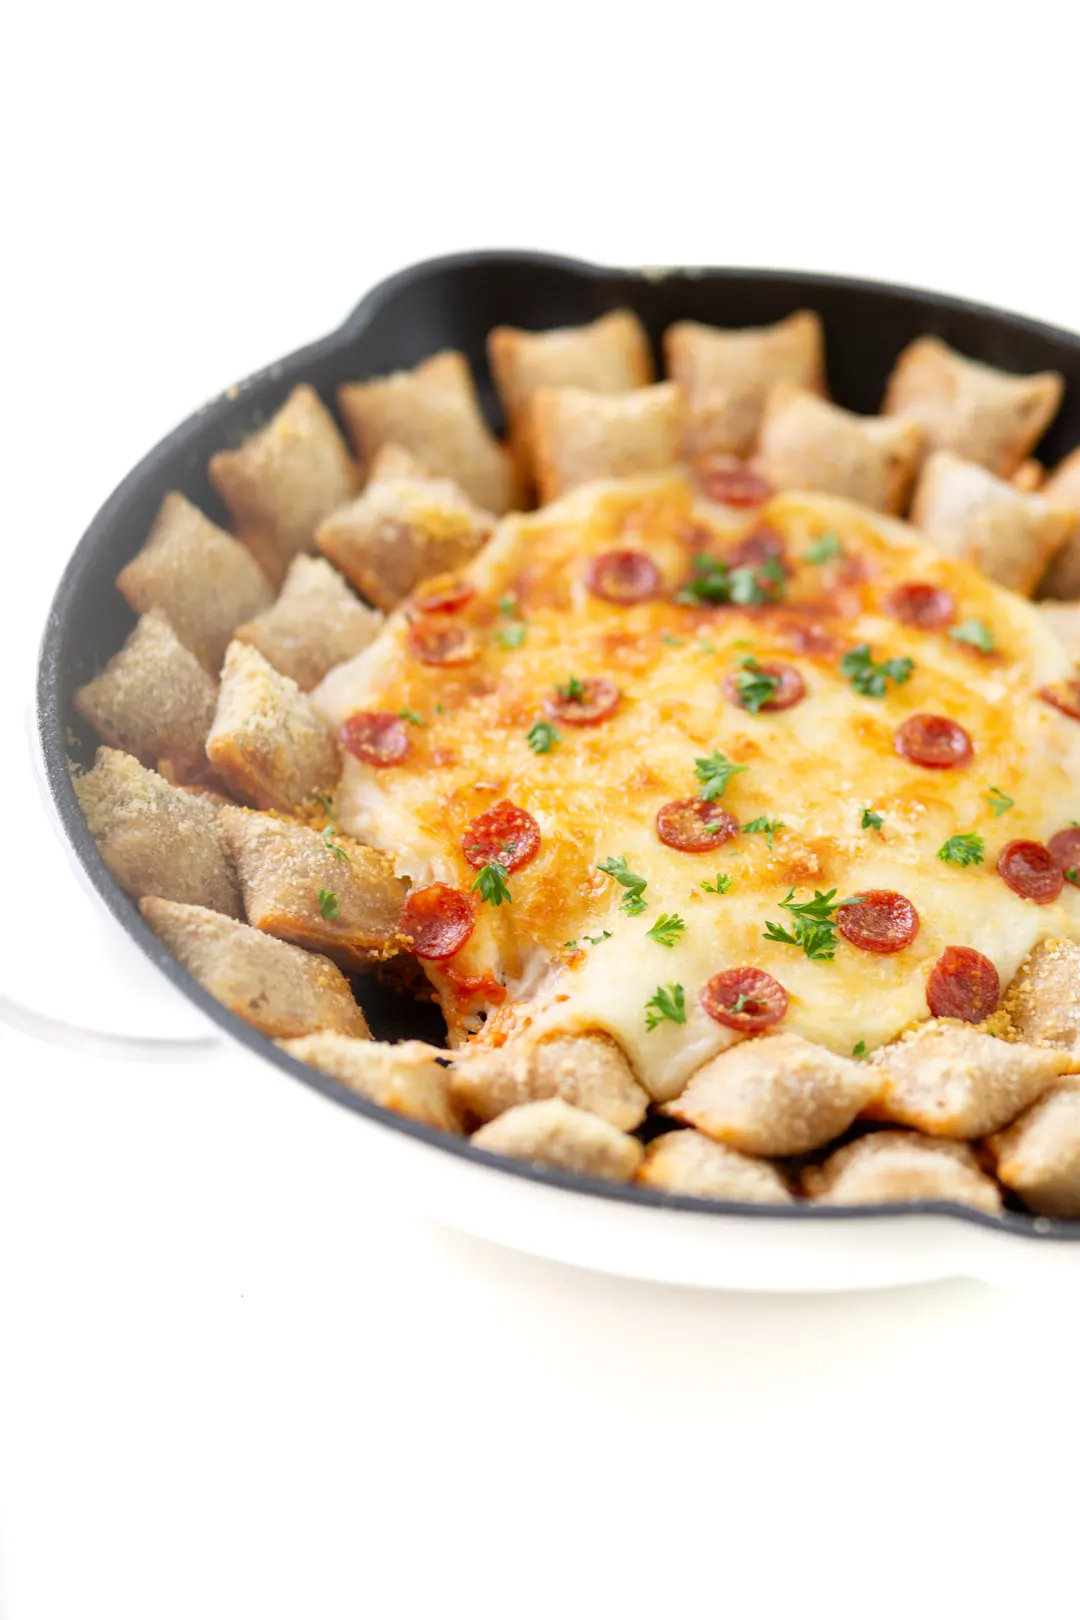 pepperoni pizza roll skillet dip with one pizza roll eaten to reveal the cheesy goodness inside the skillet